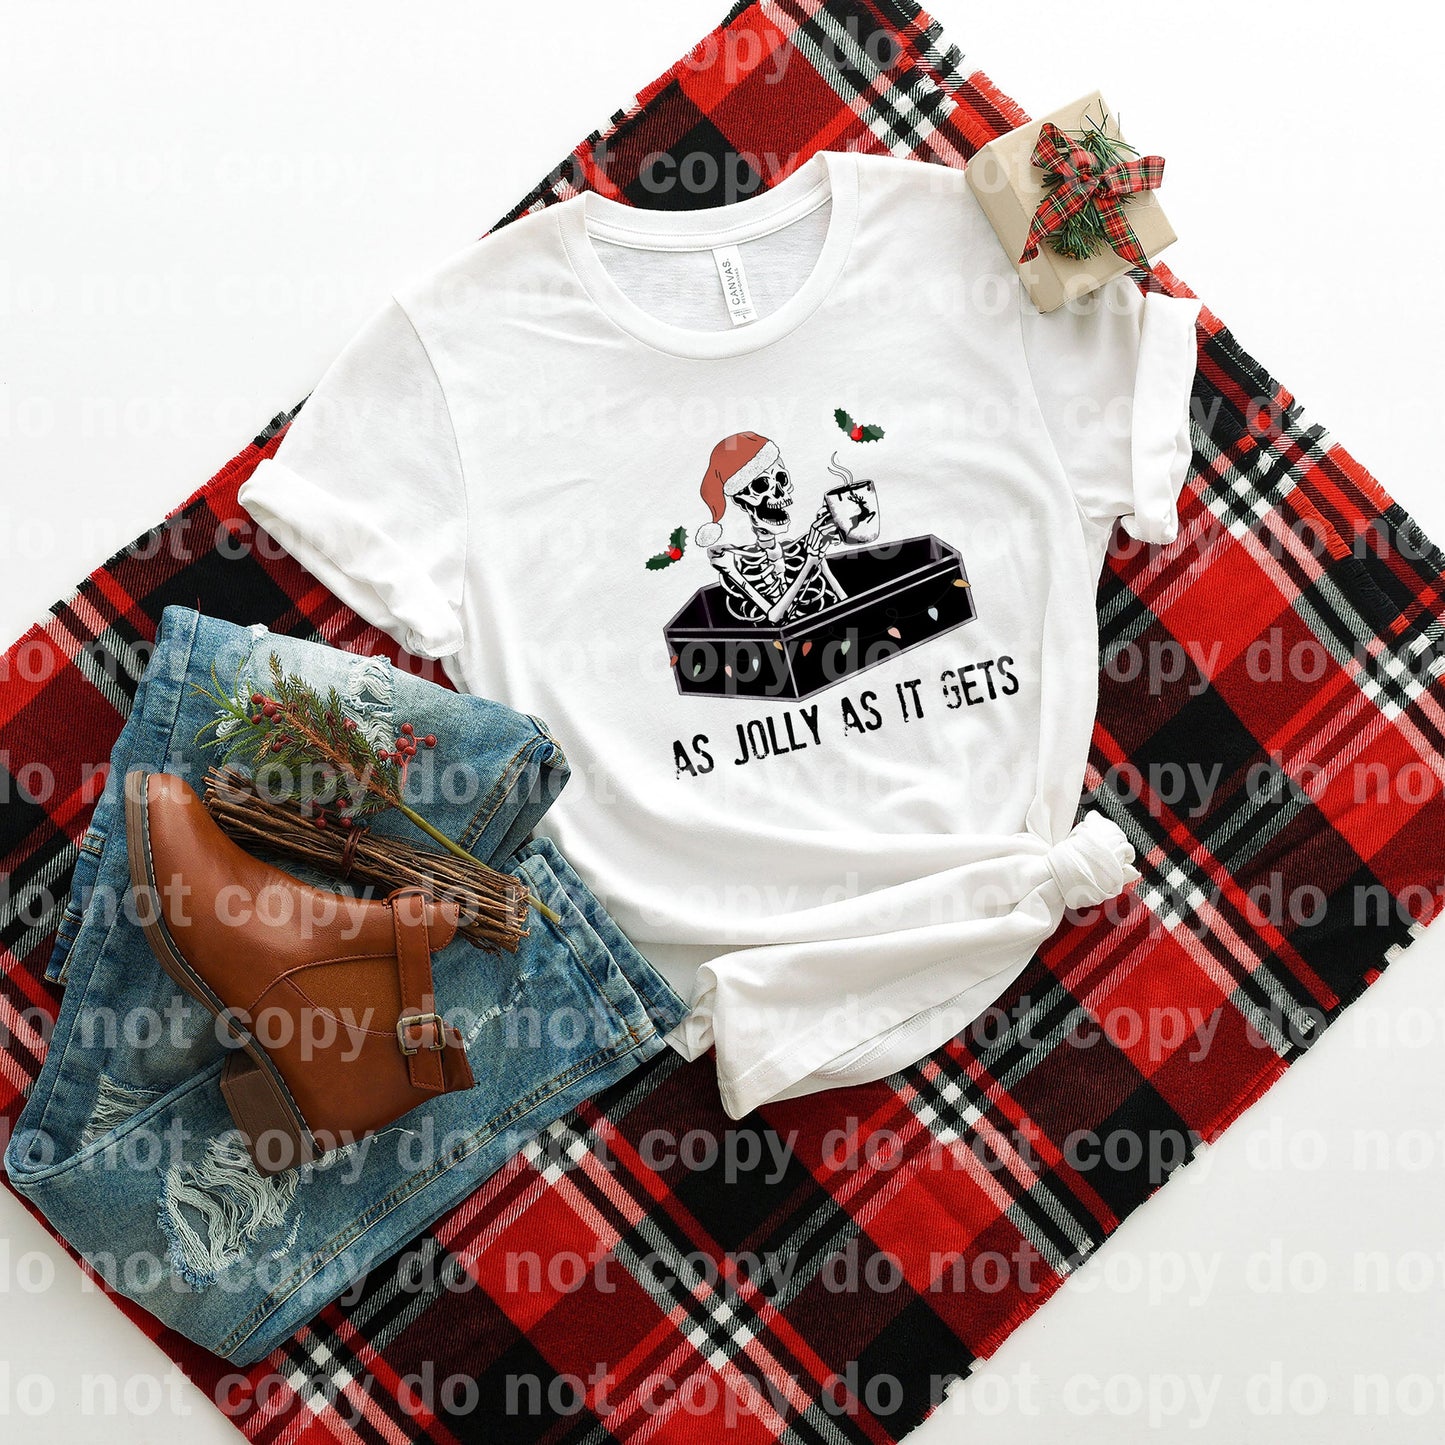 As Jolly As It Gets Dream Print or Sublimation Print